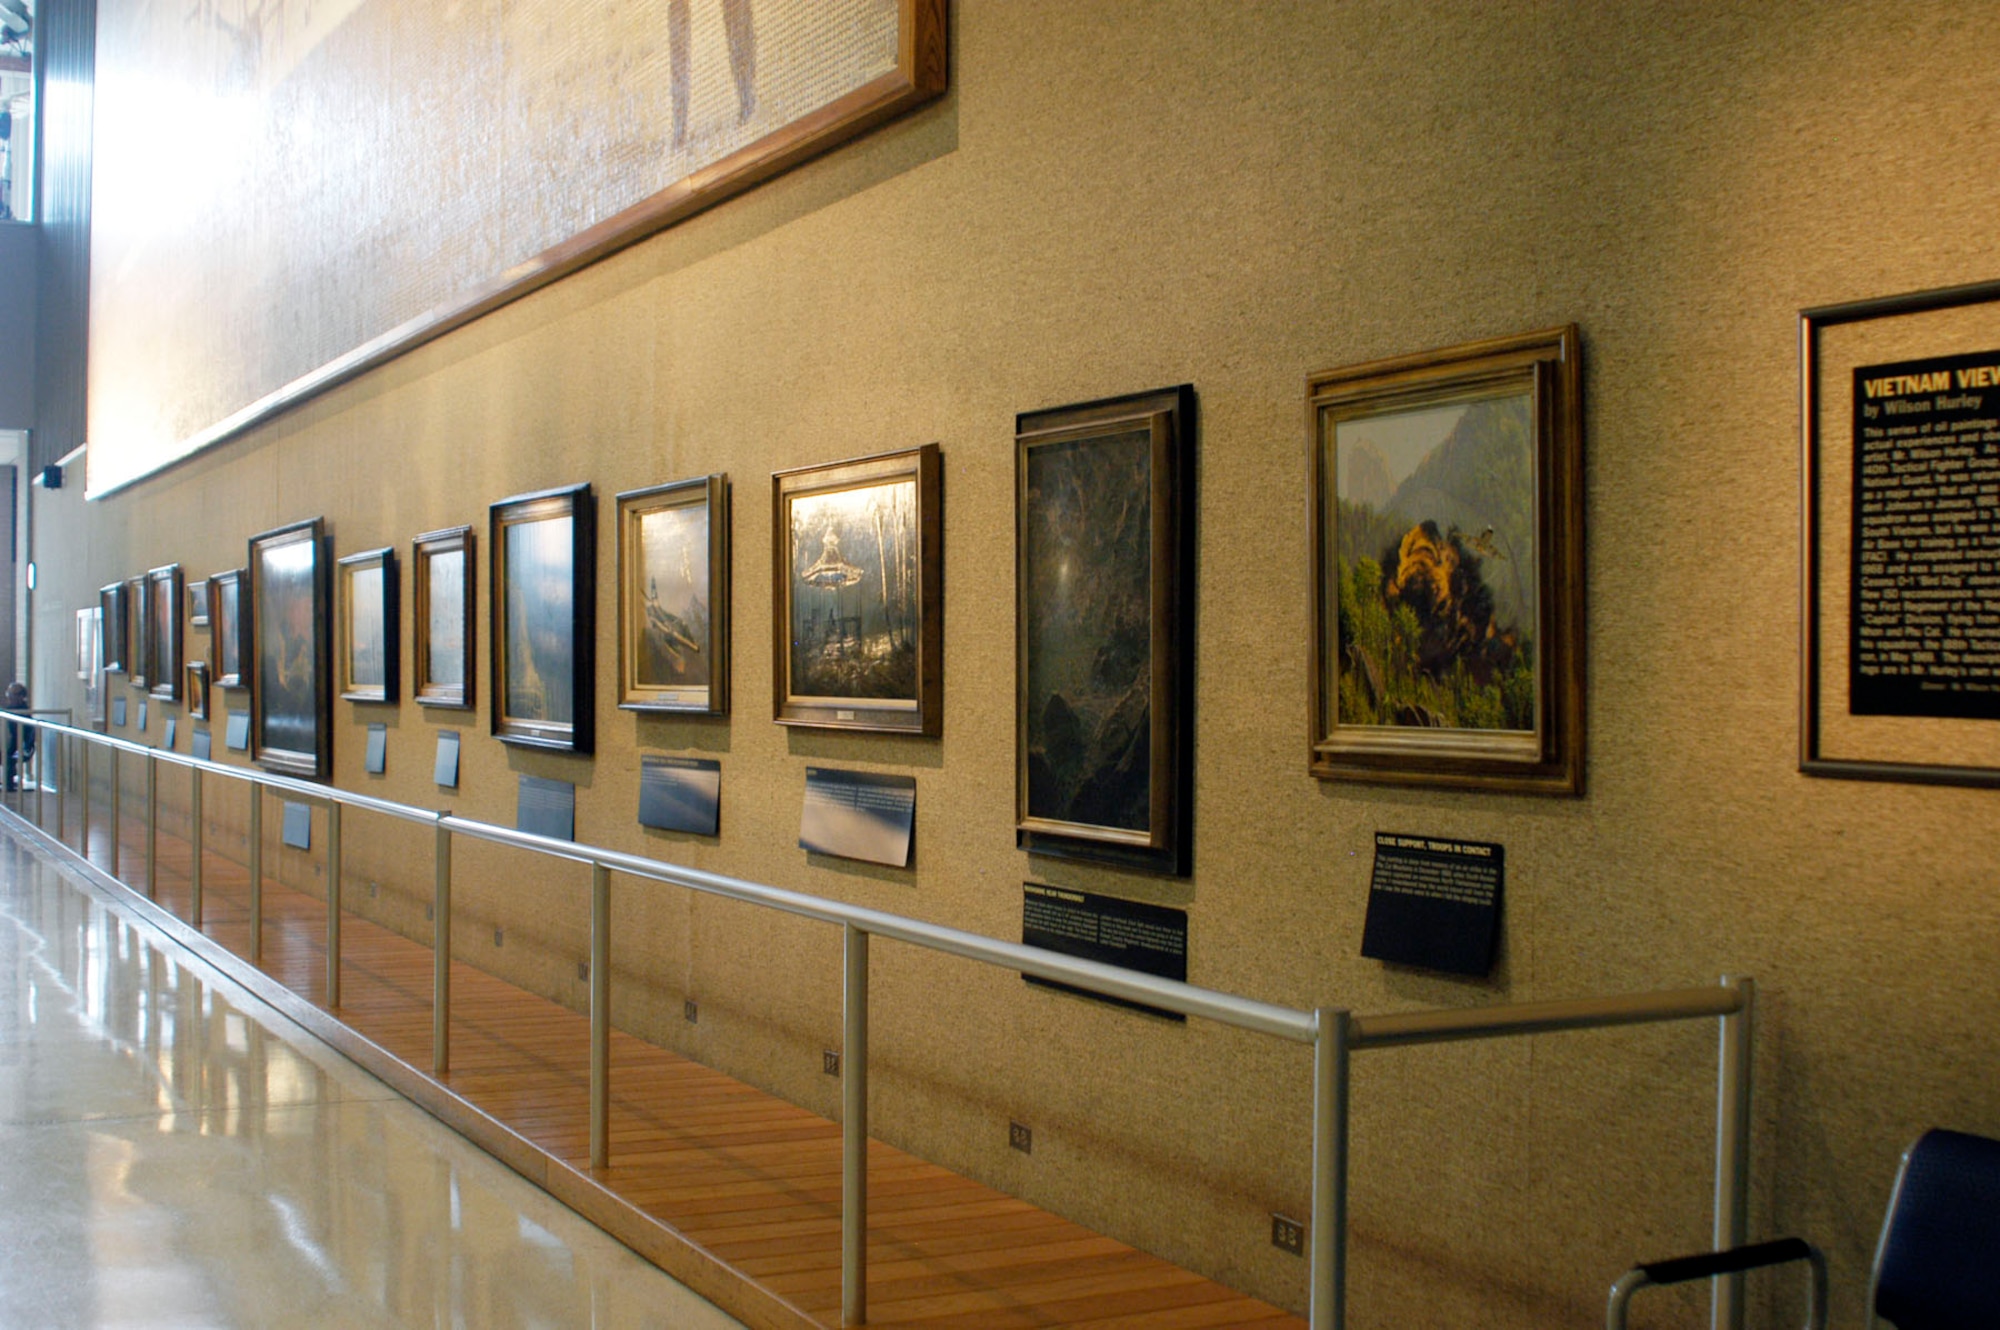 DAYTON, Ohio -- Paintings by Wilson Hurley on display in Kettering Hall at the National Museum of the U.S. Air Force. (U.S. Air Force)